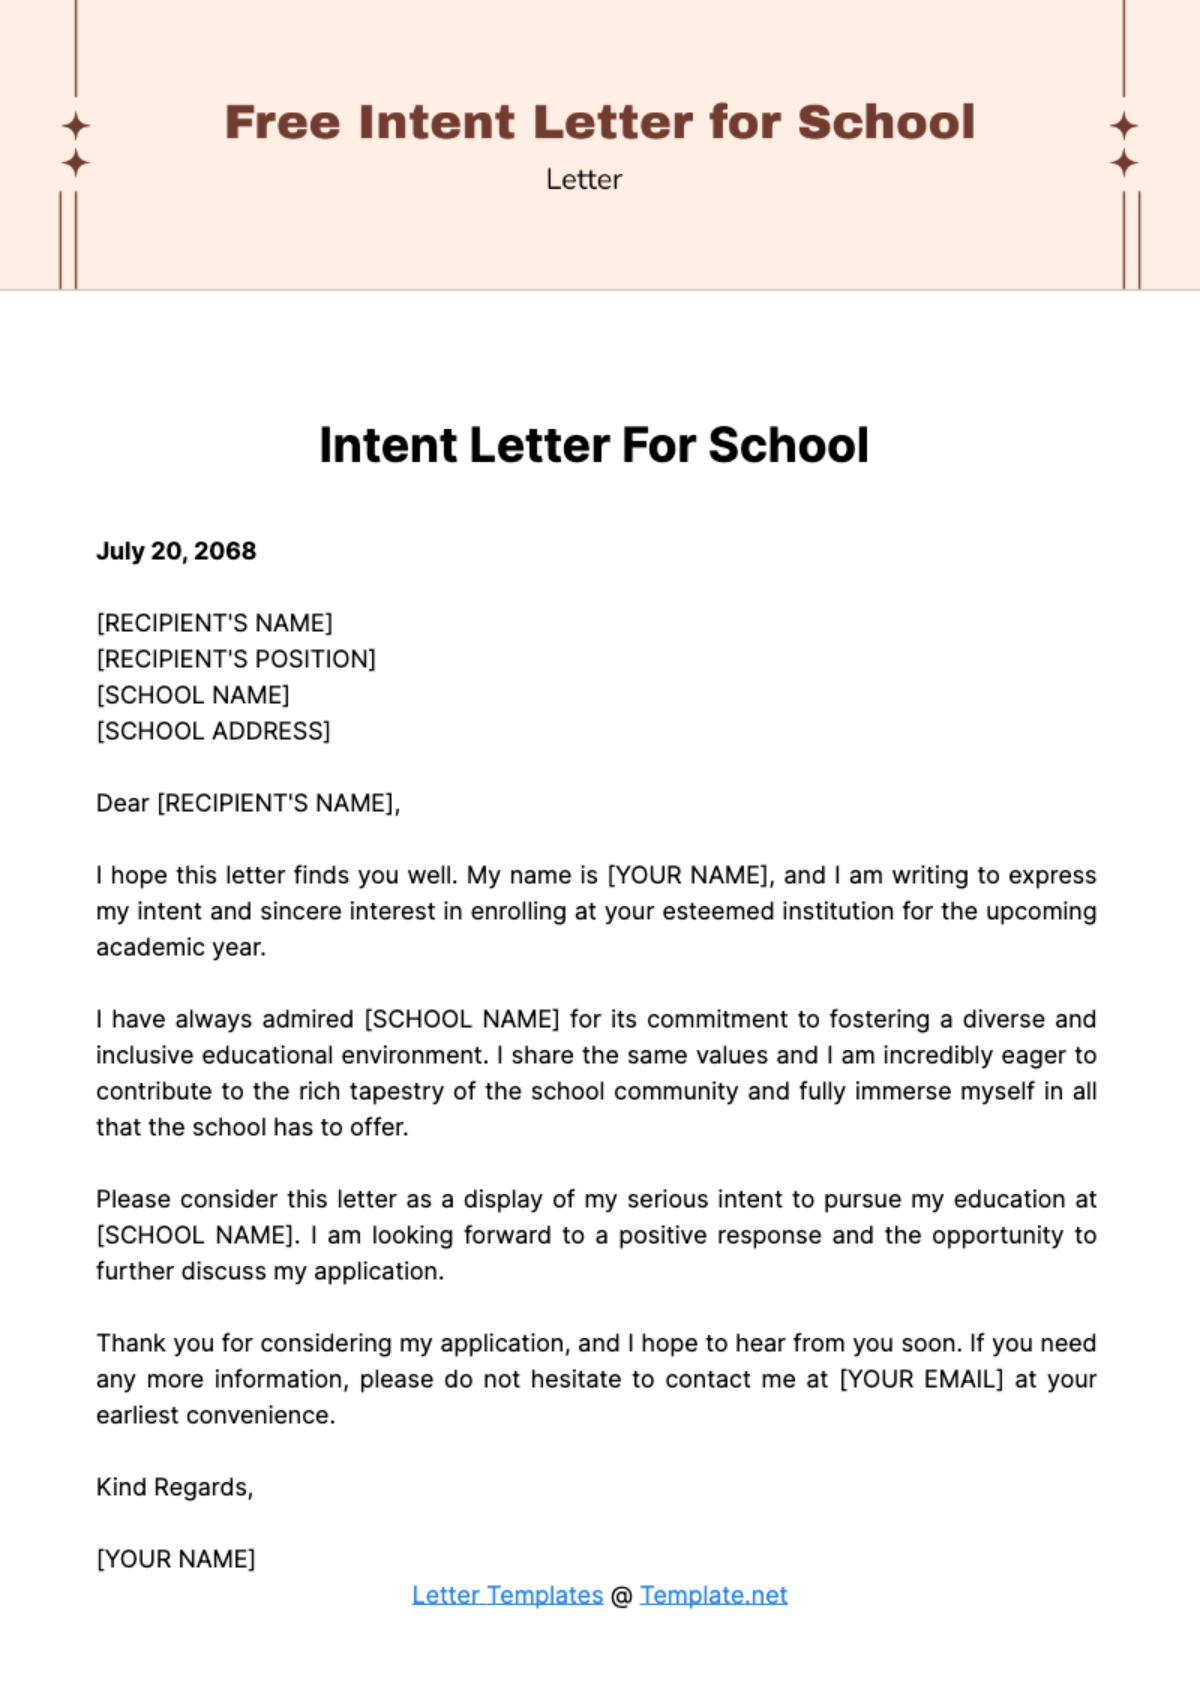 Free Intent Letter for School Template